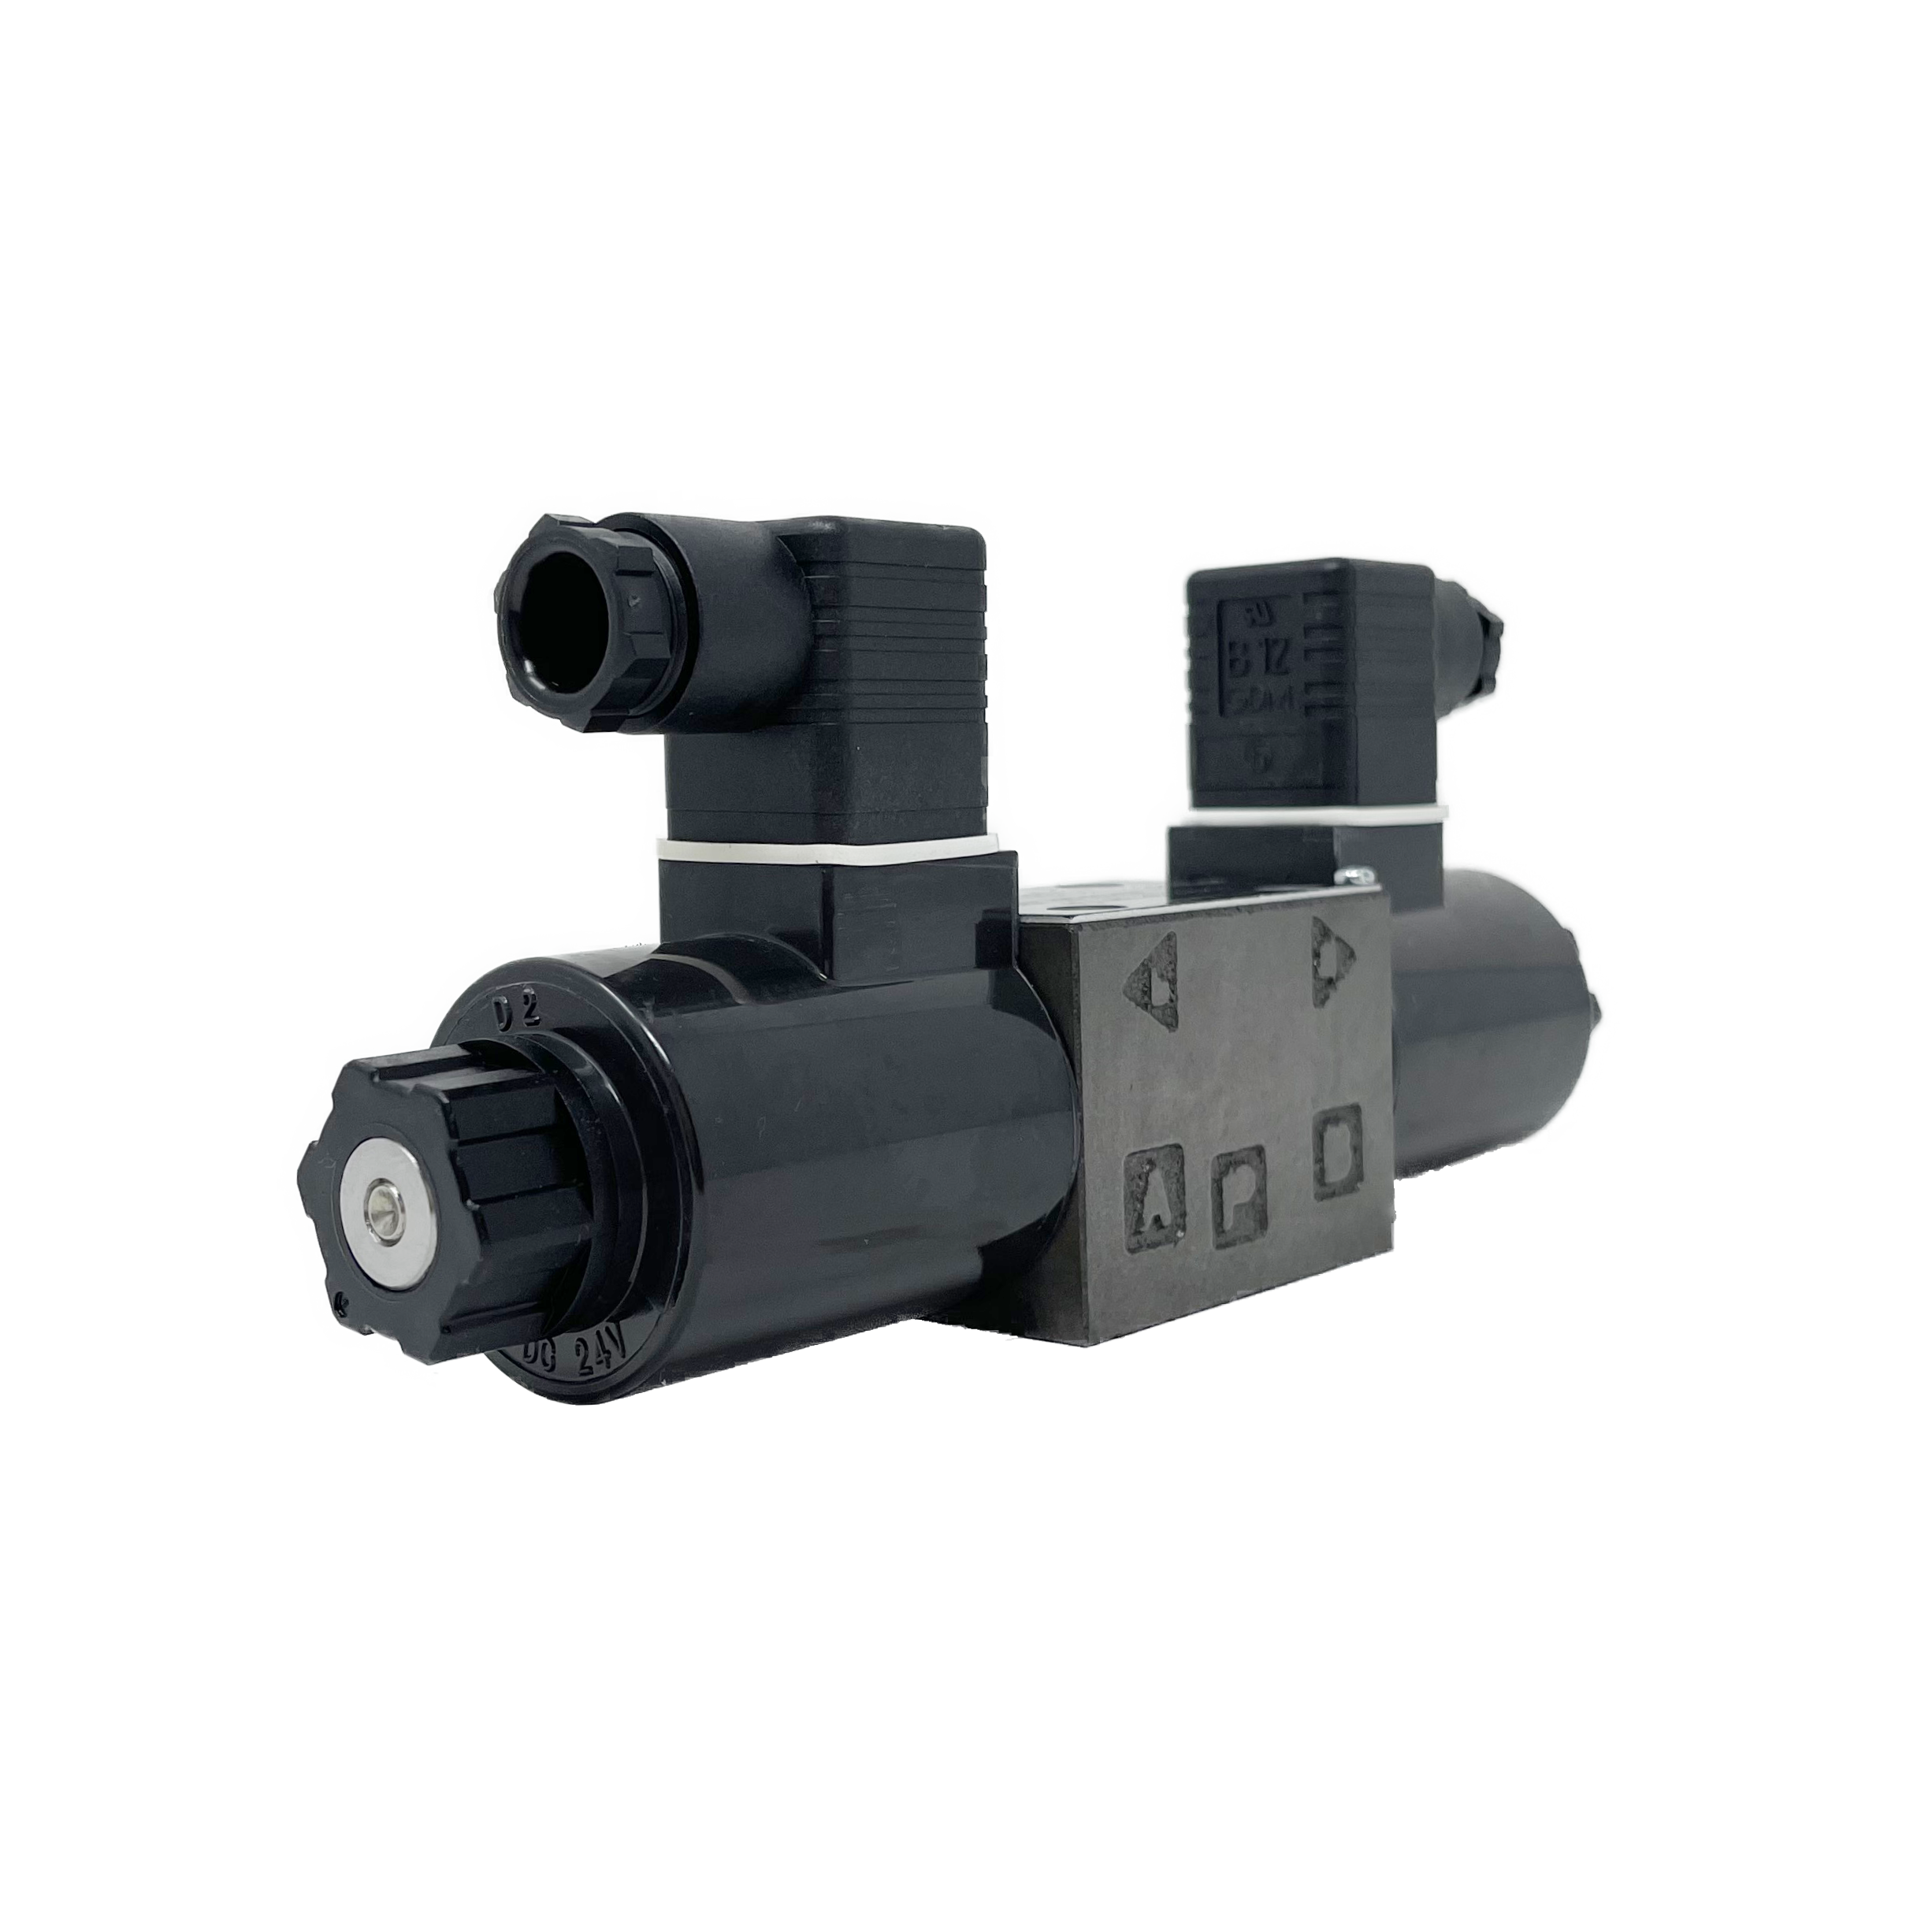 SA-G01-C4-C115-E31 : Nachi Solenoid Valve, 3P4W, D03 (NG6), 13.2GPM, 5075psi, All Ports Open Neutral, 110 VAC, DIN